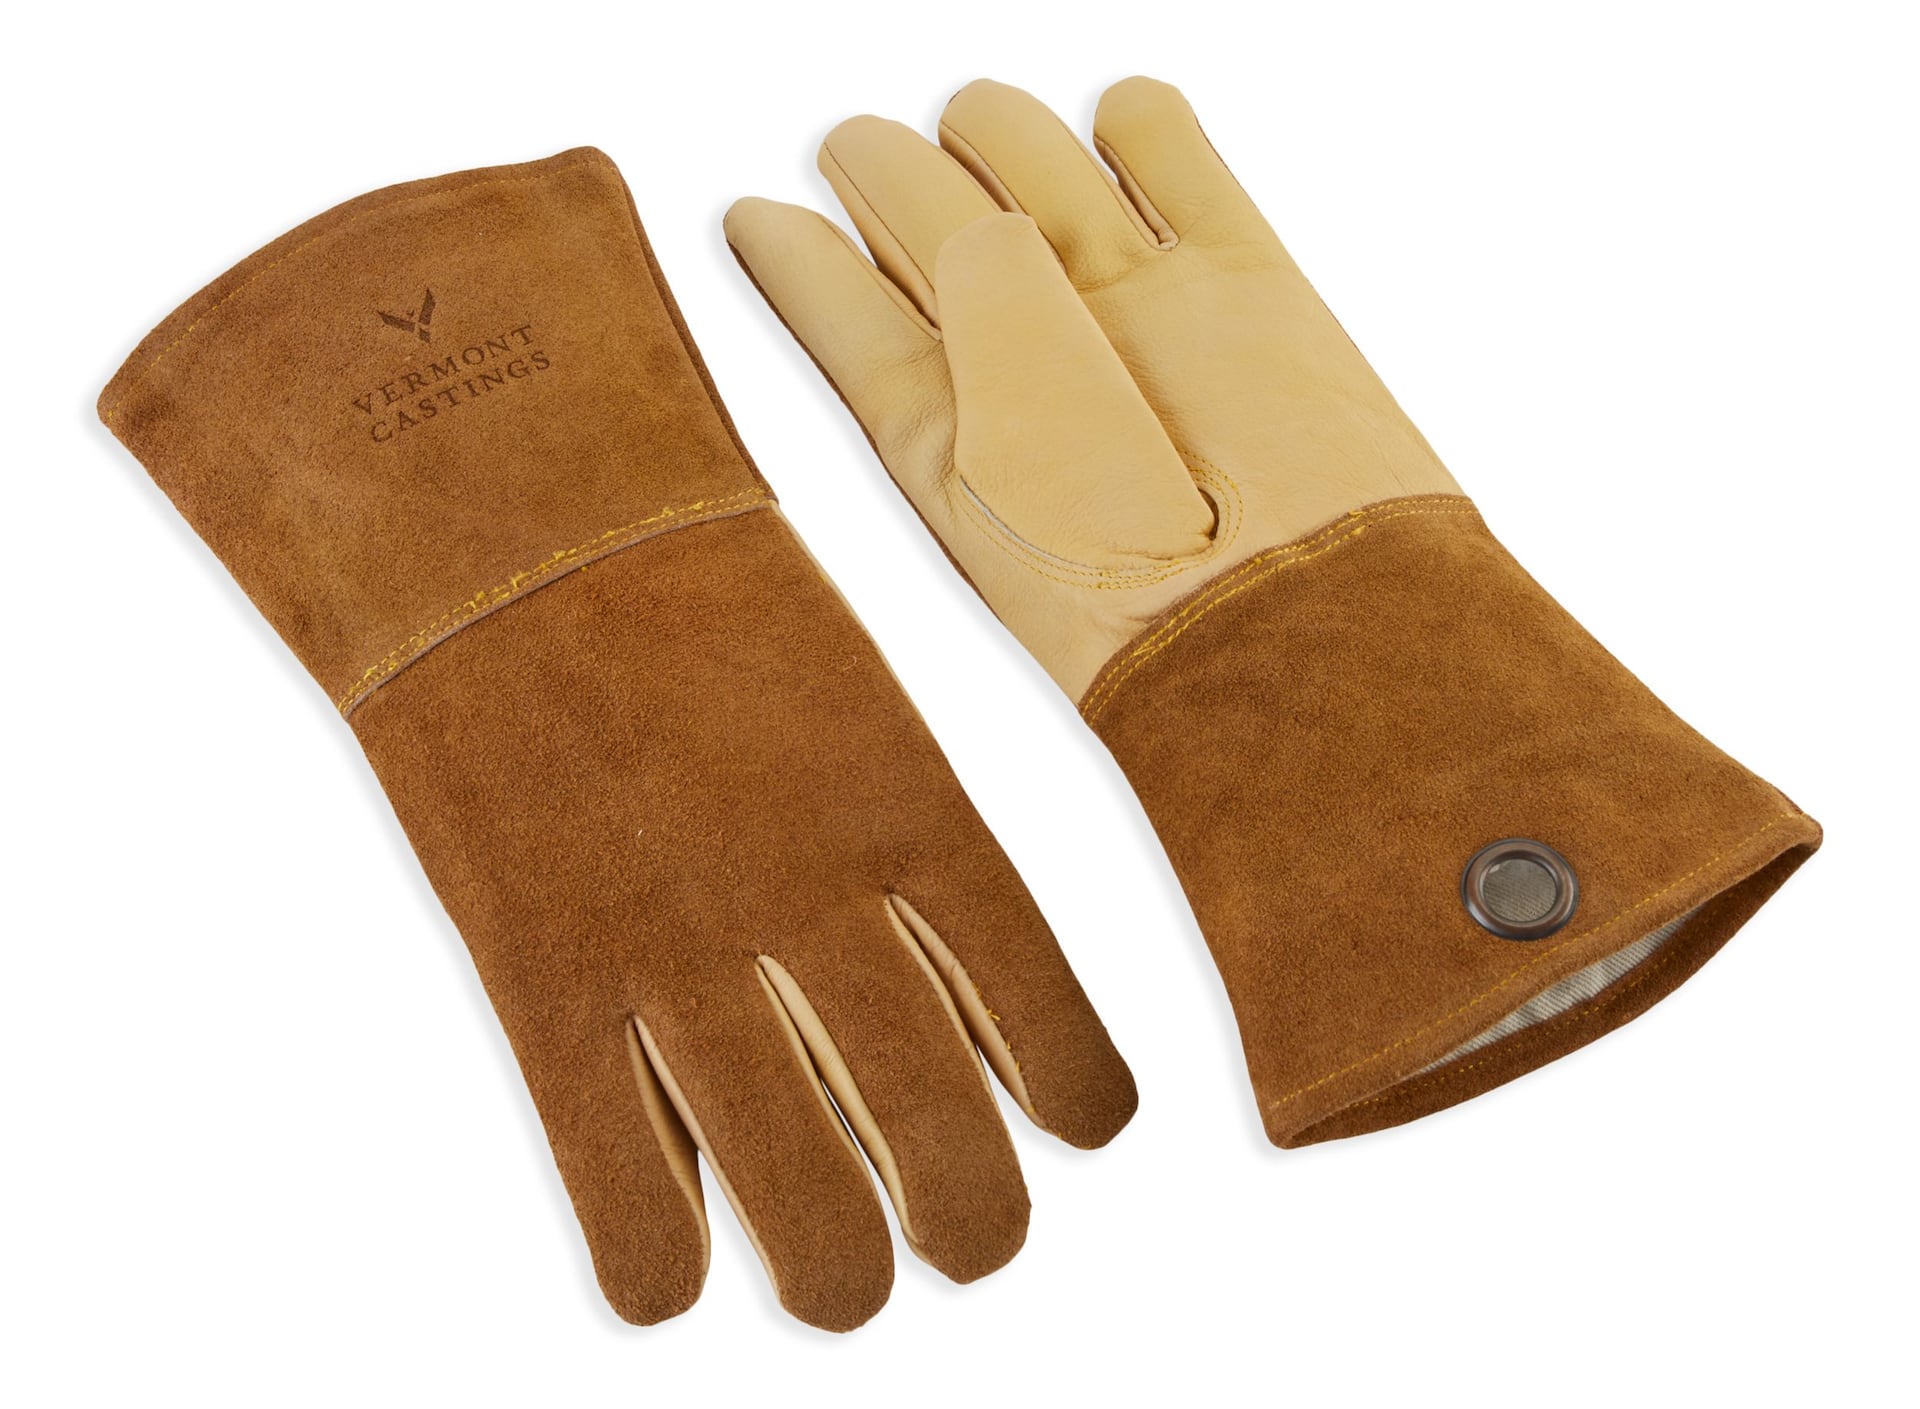 https://media-www.canadiantire.ca/product/seasonal-gardening/backyard-living/outdoor-cooking-accessories/0852153/vermont-castings-gloves-x2-3e942975-acd6-440a-925f-76b262ab5a1d-jpgrendition.jpg